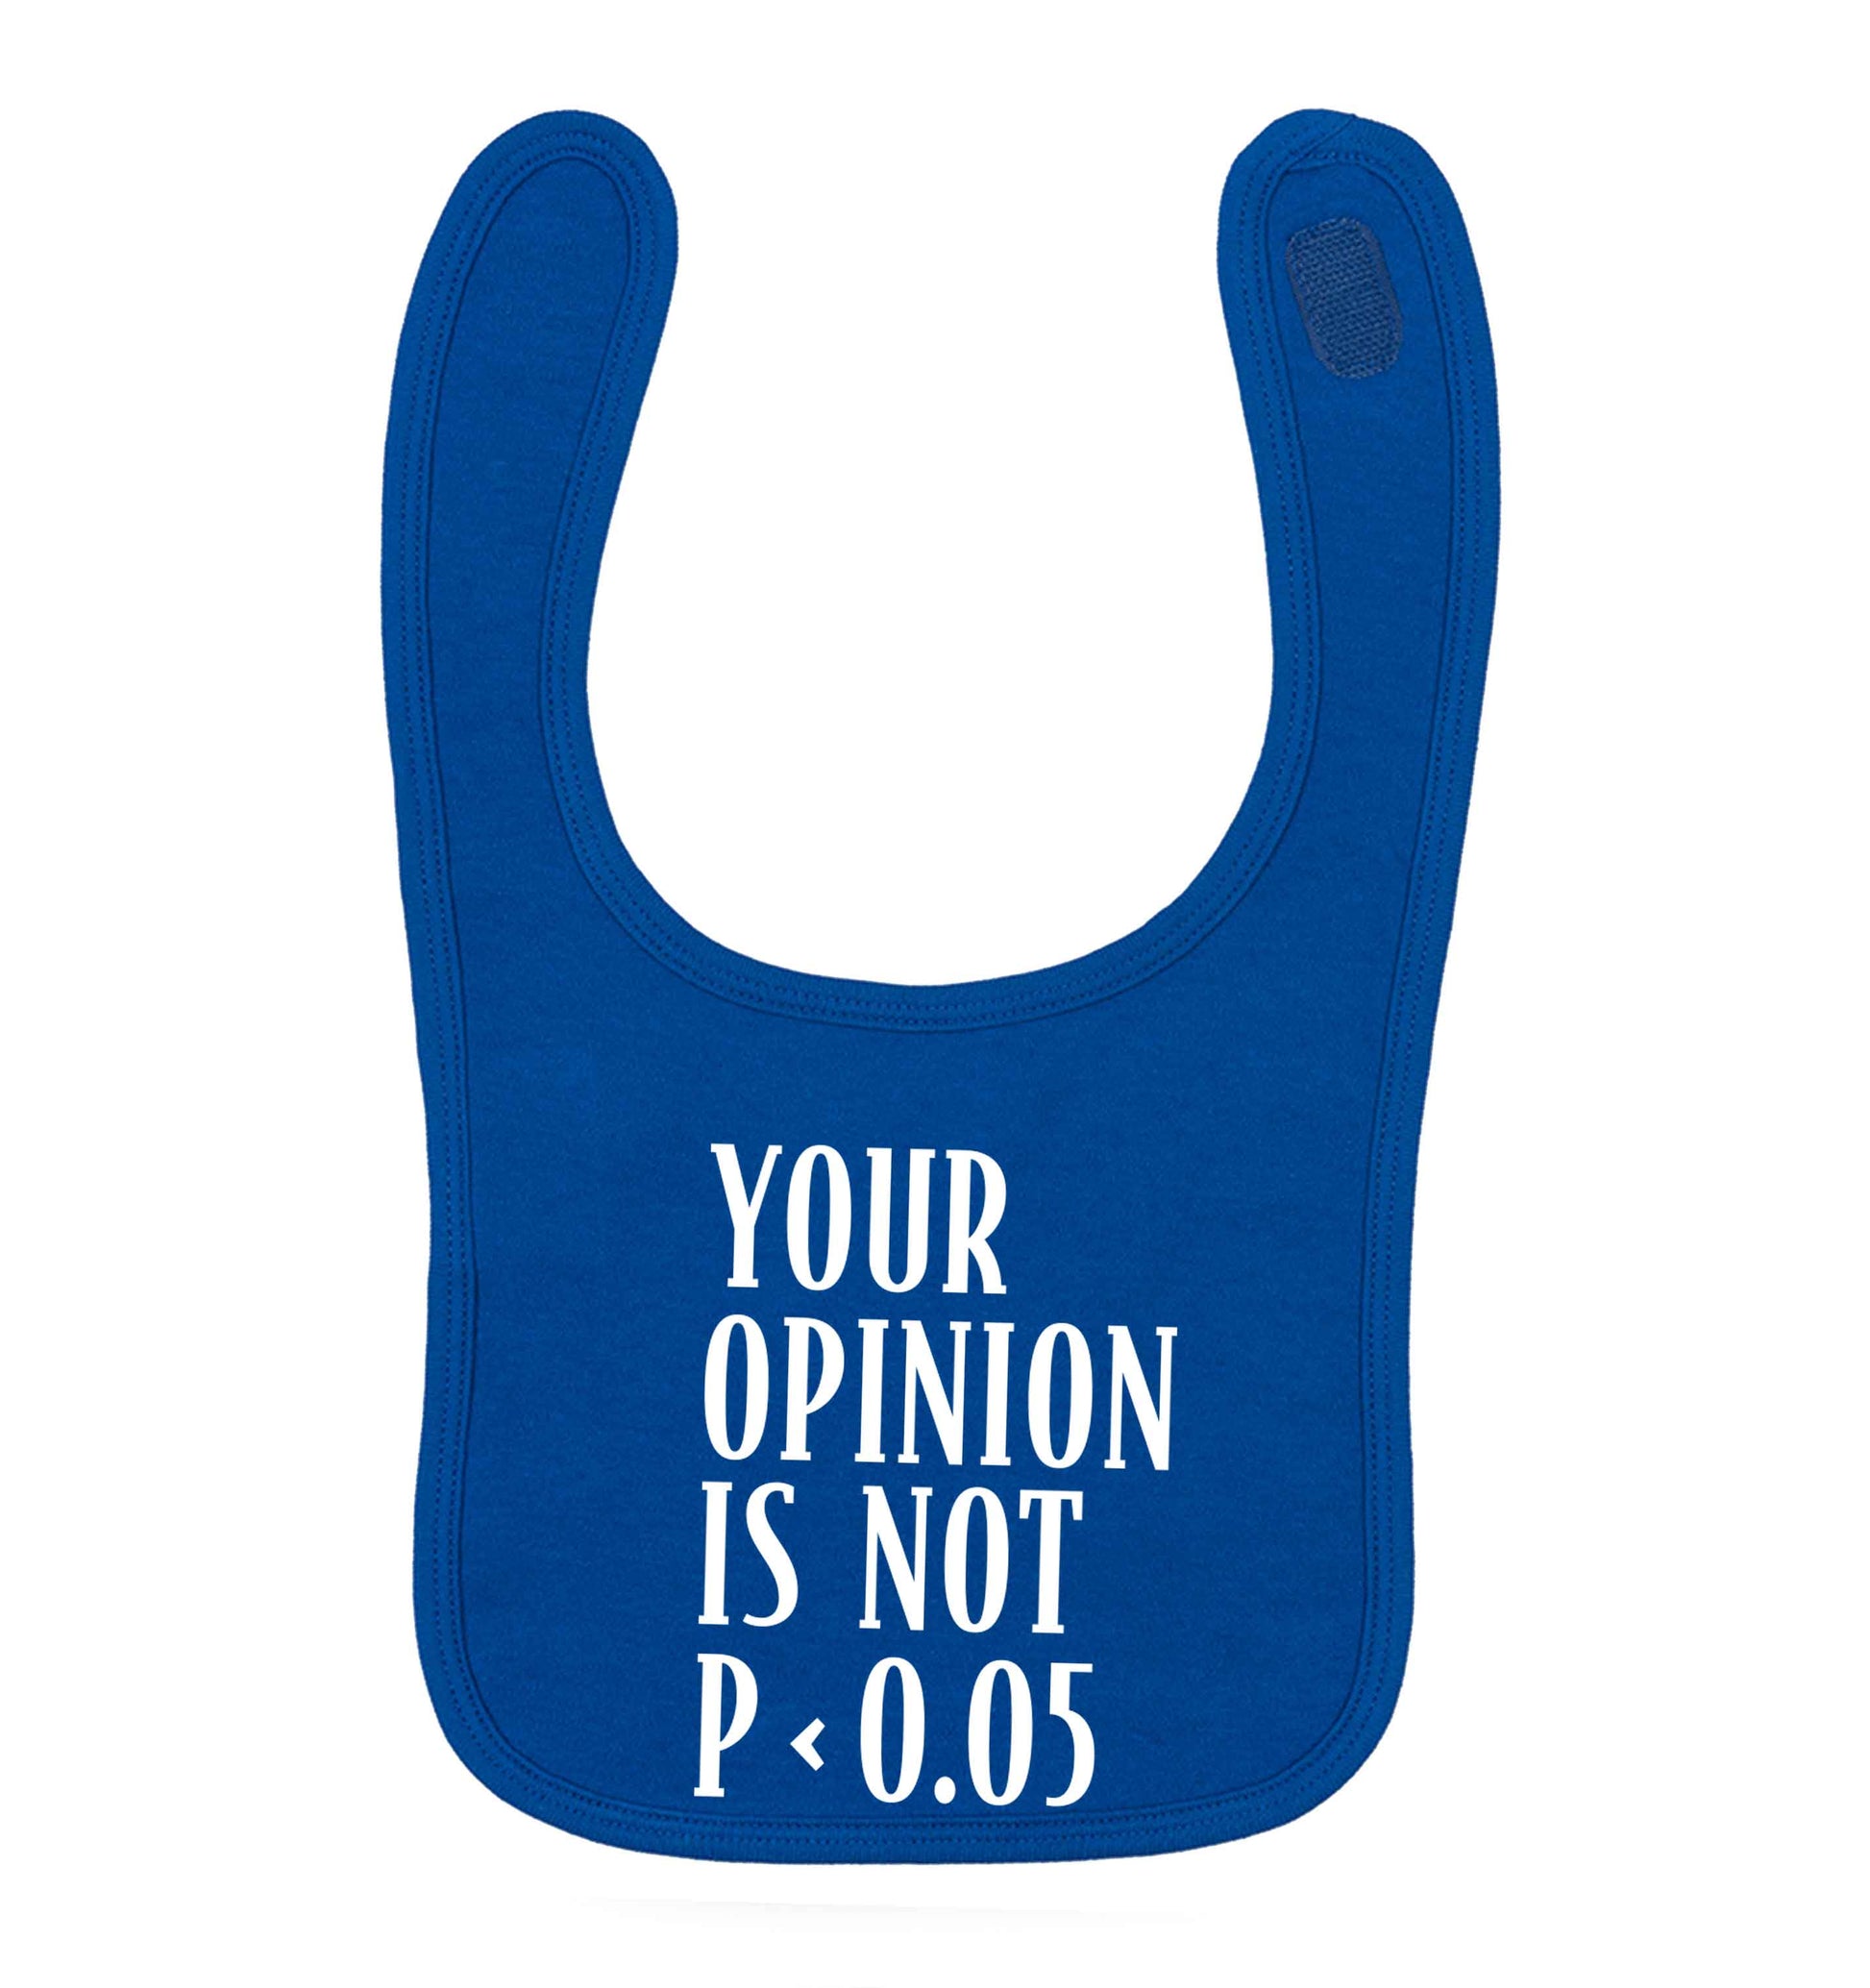 Your opinion is not P < 0.05royal blue baby bib